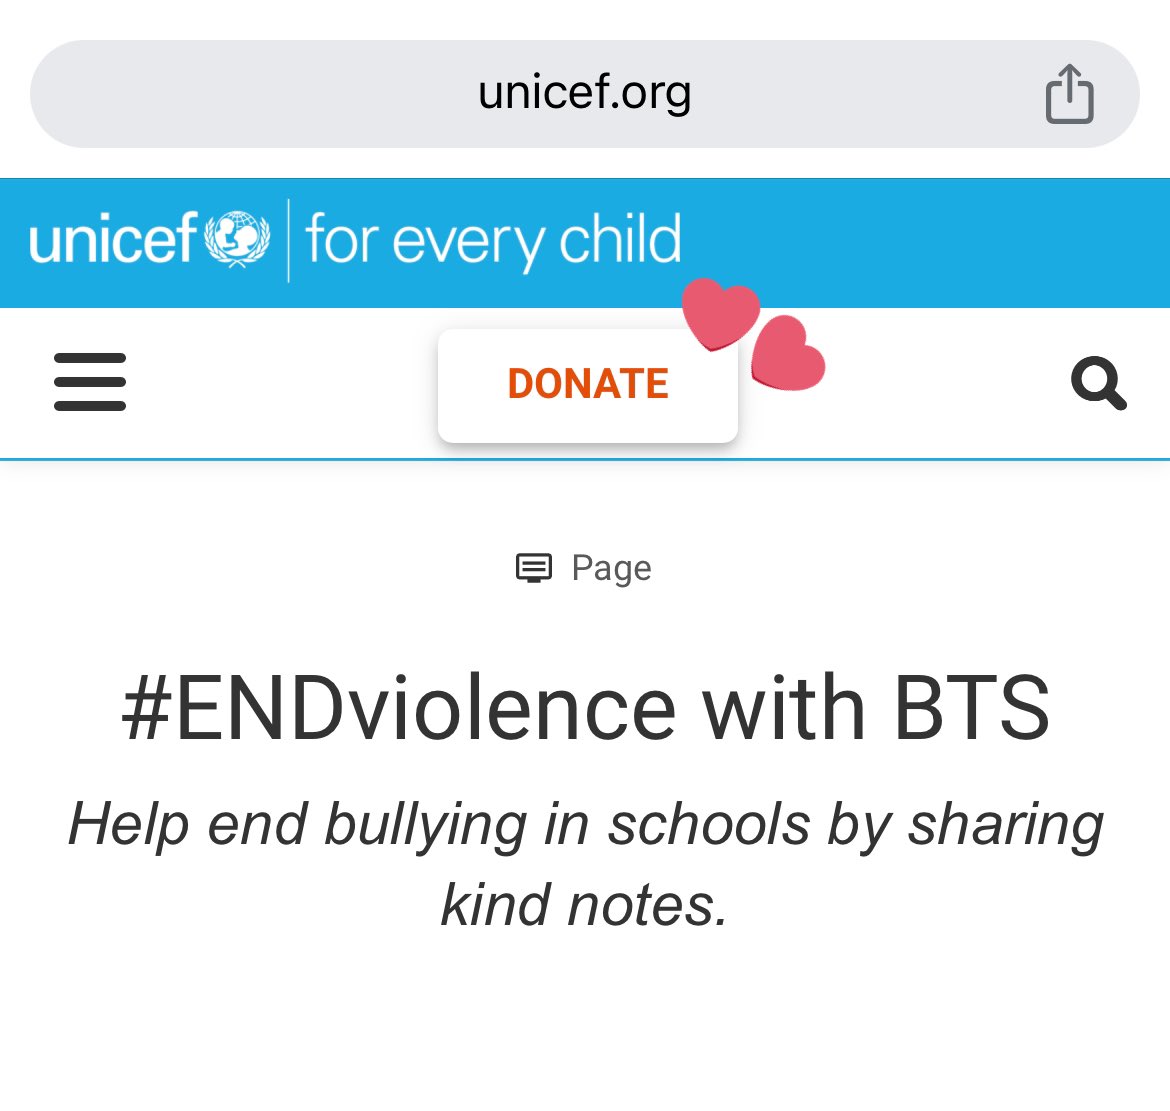 @OneInAnARMY @unicefkorea On the Unicef #EndViolence site, there is a “donate” option that will route us to a relevant initiative unicef.org/end-violence If you donate, pls do log the donation with @OneInAnARMY here forms.gle/PN3nur6fWezWo4…